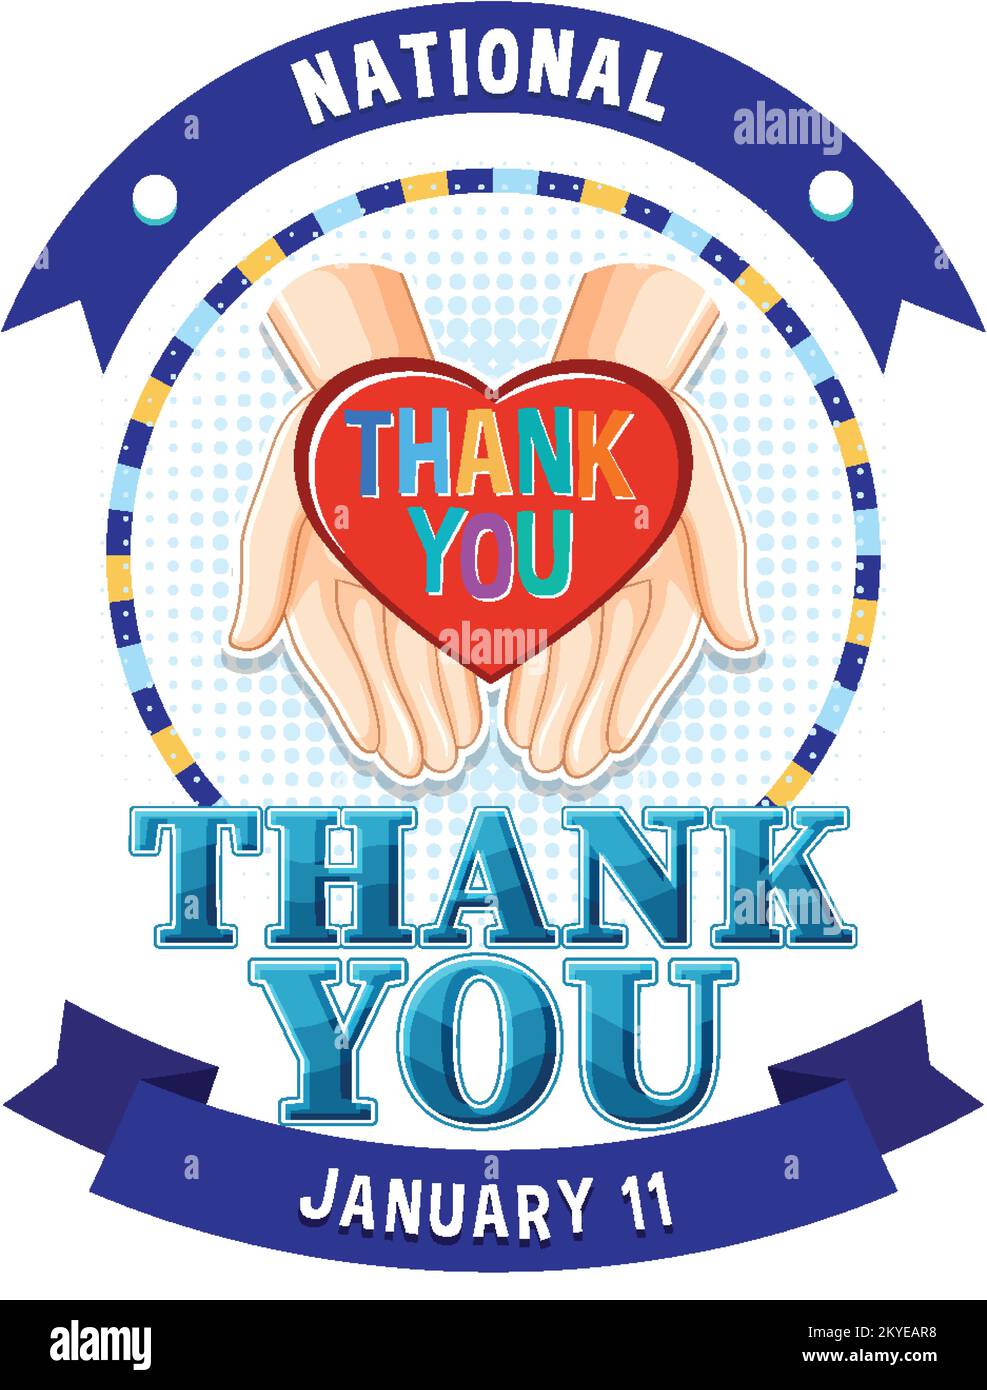 Happy National Thank You Day Banner illustration Stock Vector